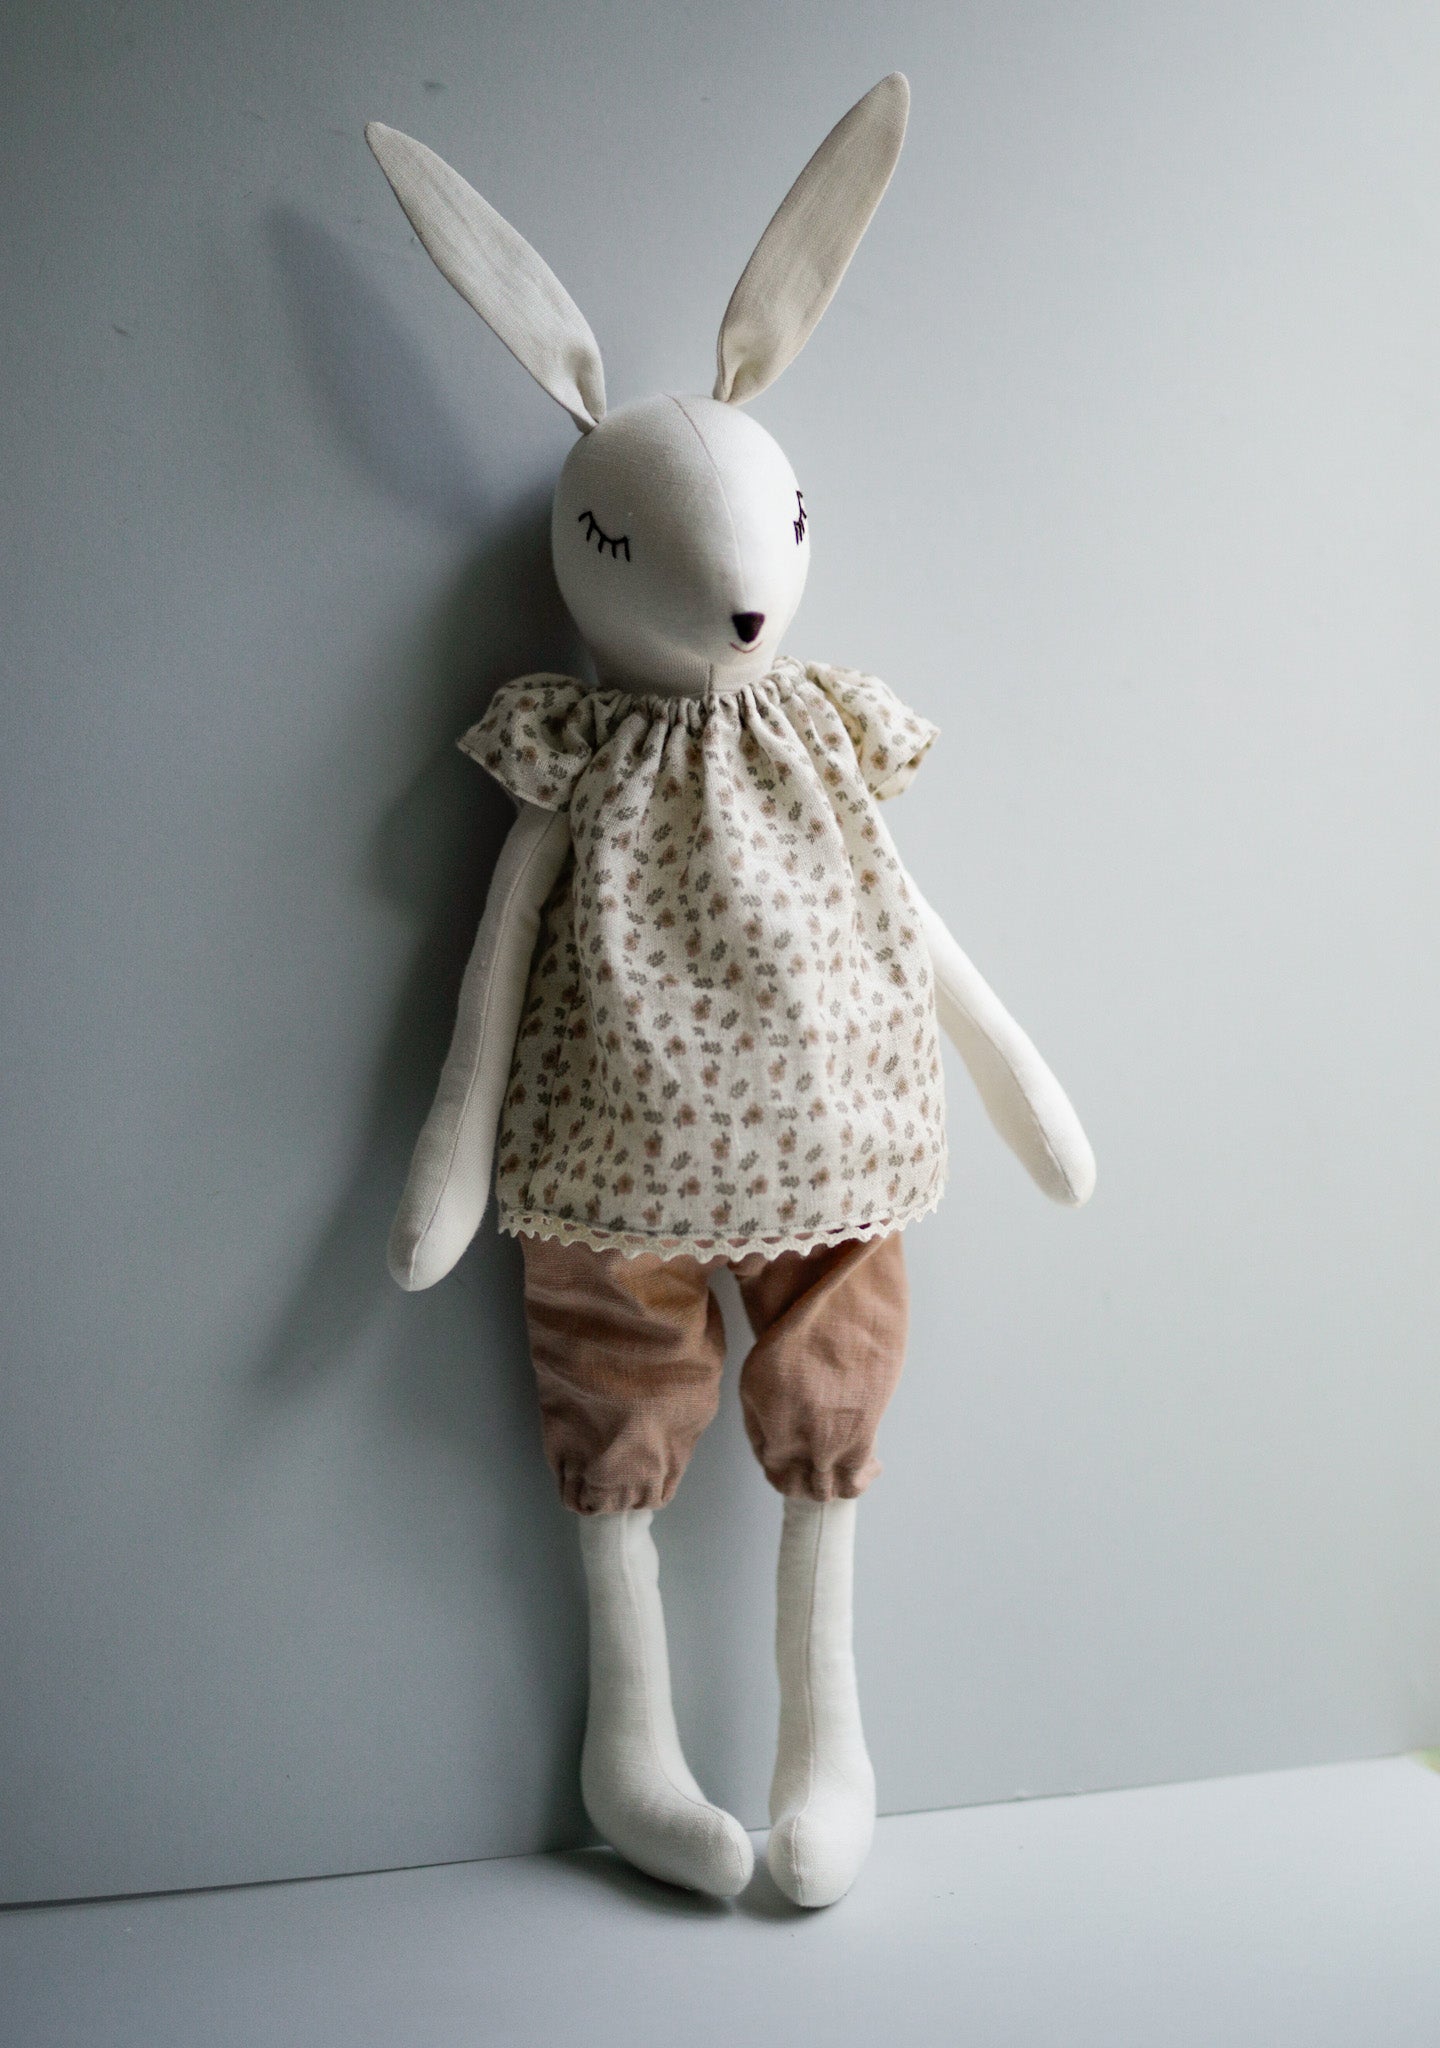 55 cm Cream Hare/Rabbit making kit with printed pattern and digital tutorial